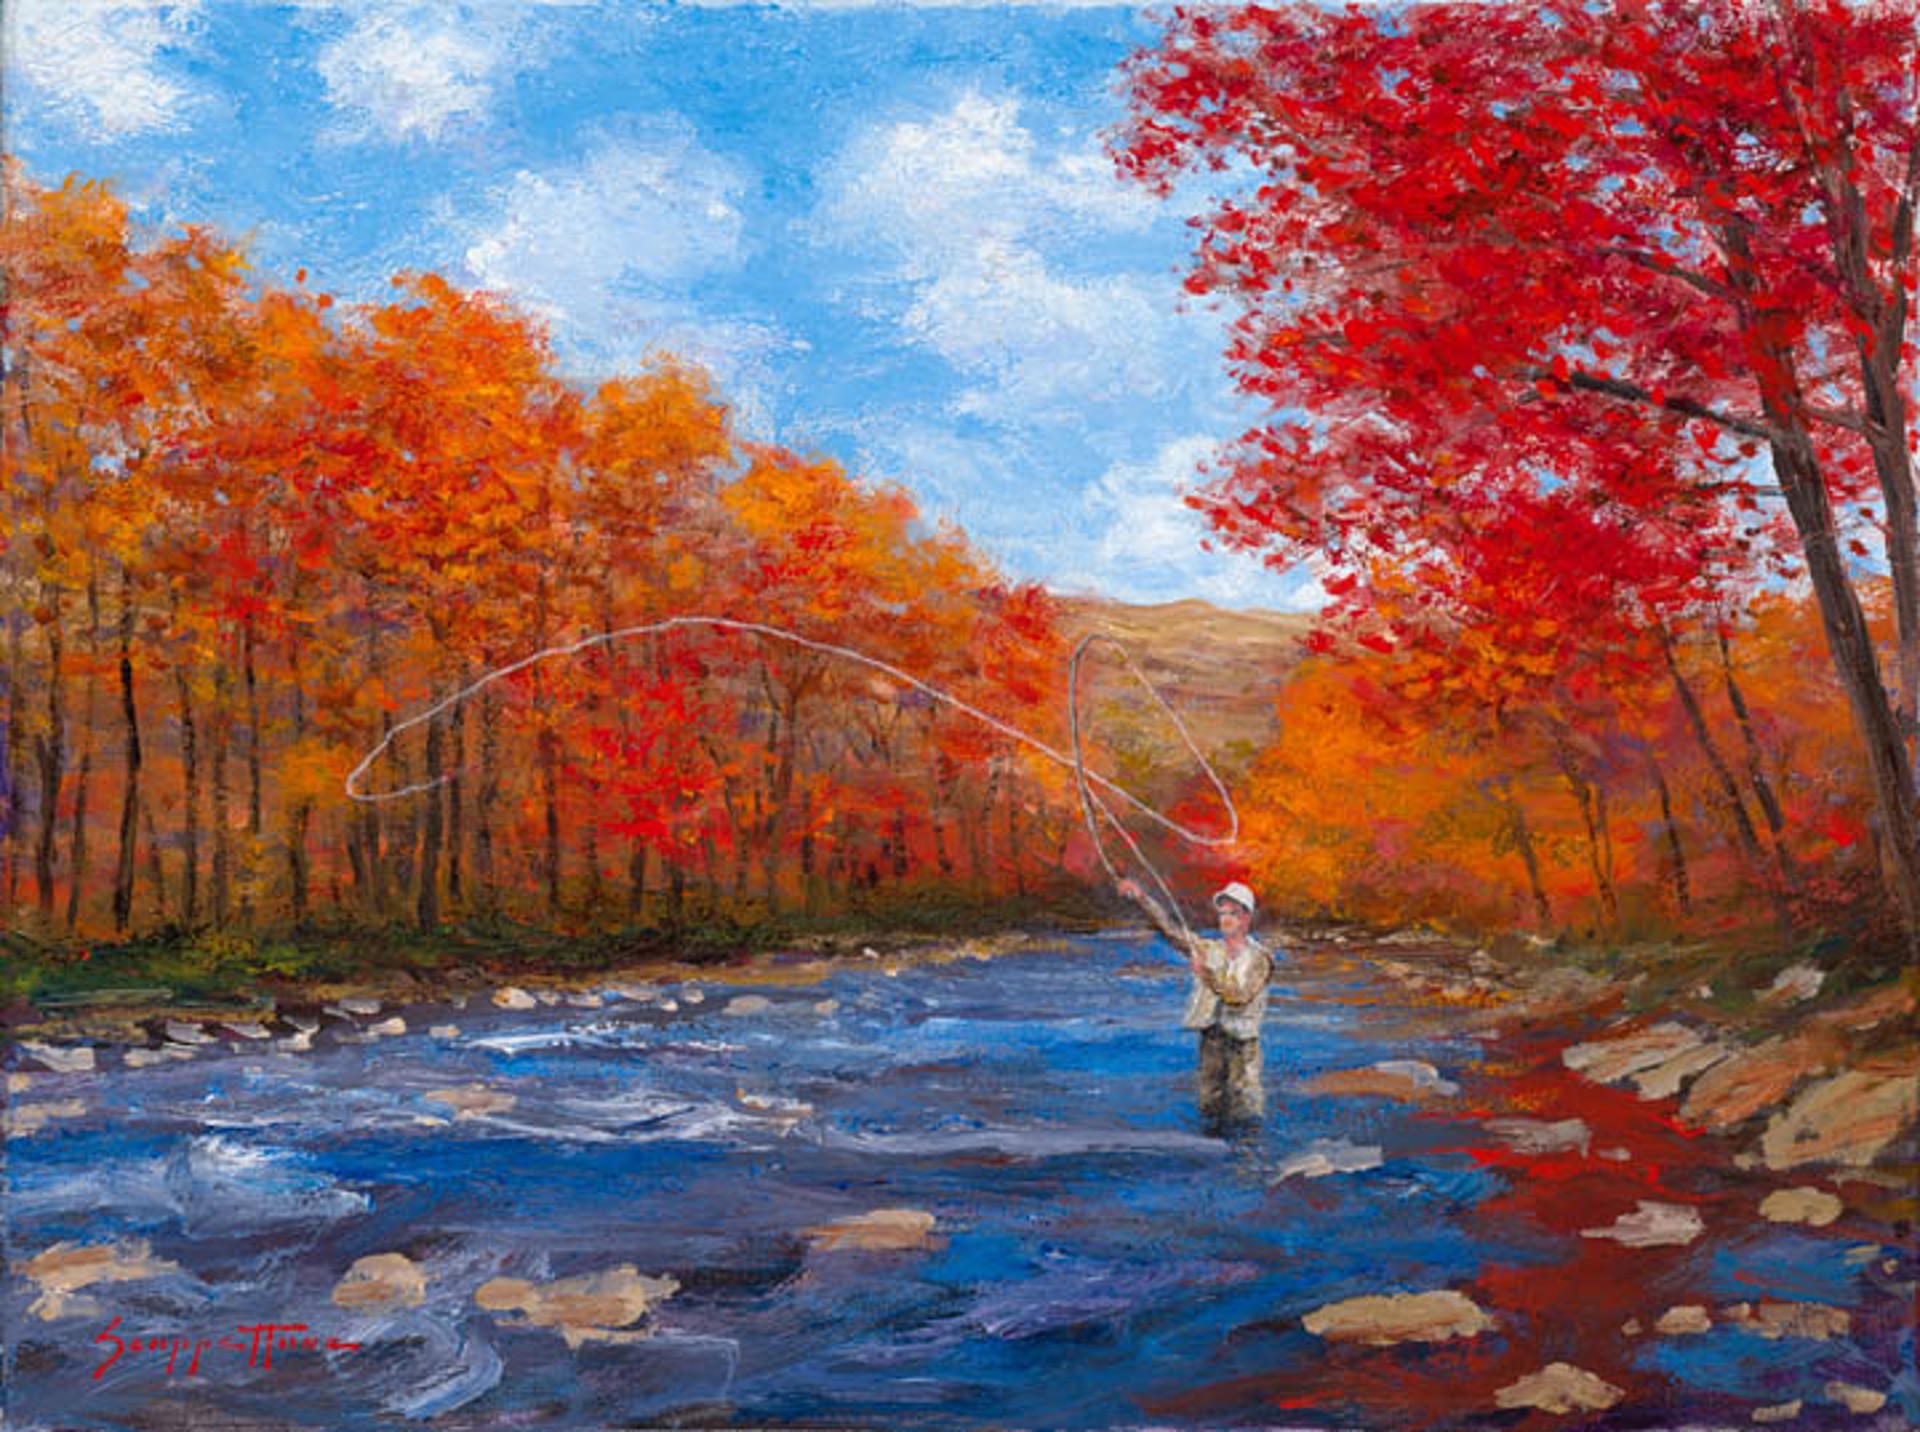 Good Morning - Fly Fisherman by James Scoppettone